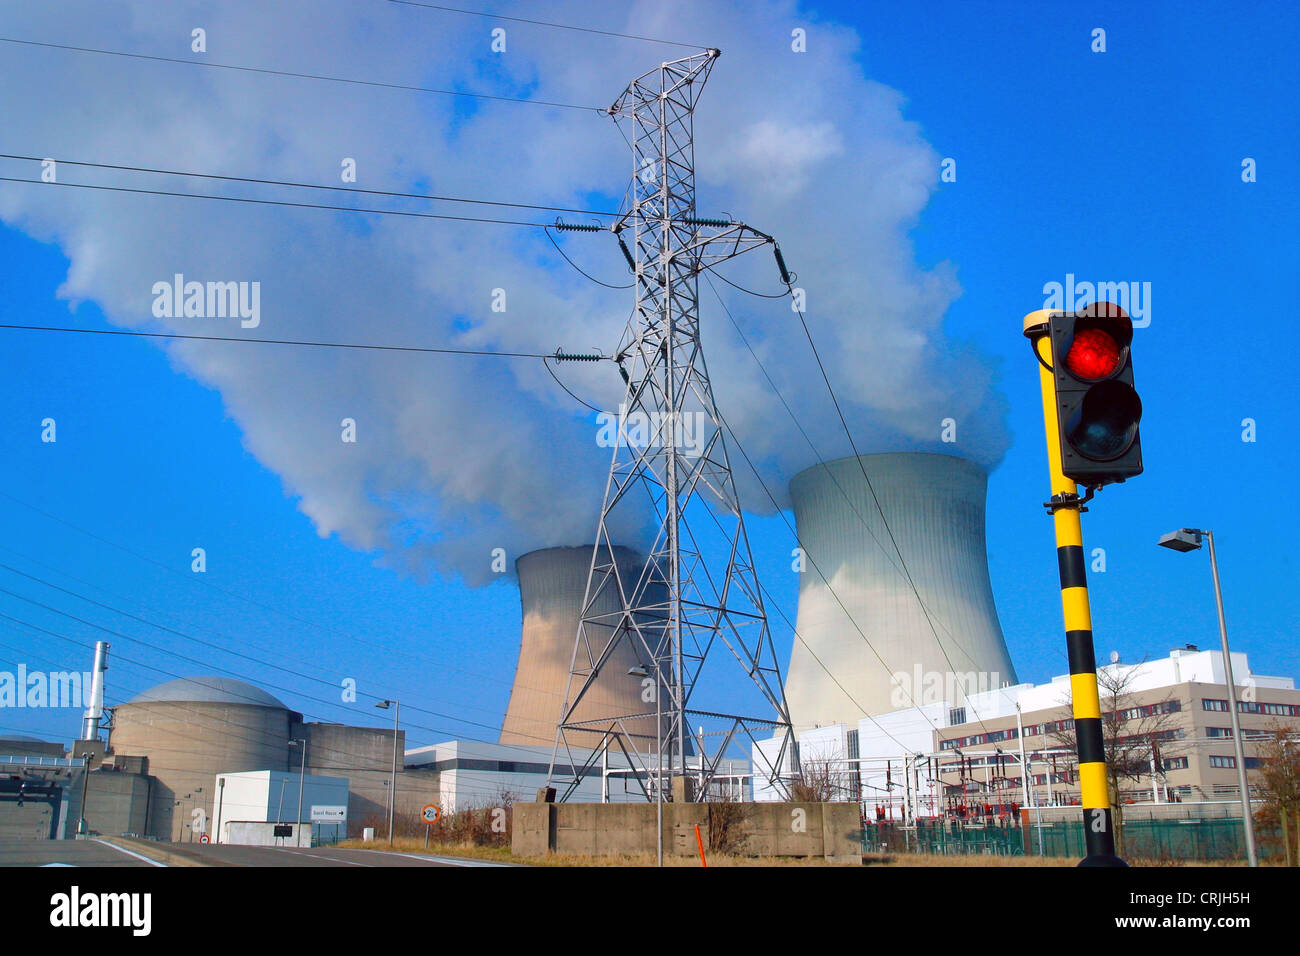 Nuclear Power station with red traffic light, Belgium, Flanders, Antwerp Stock Photo